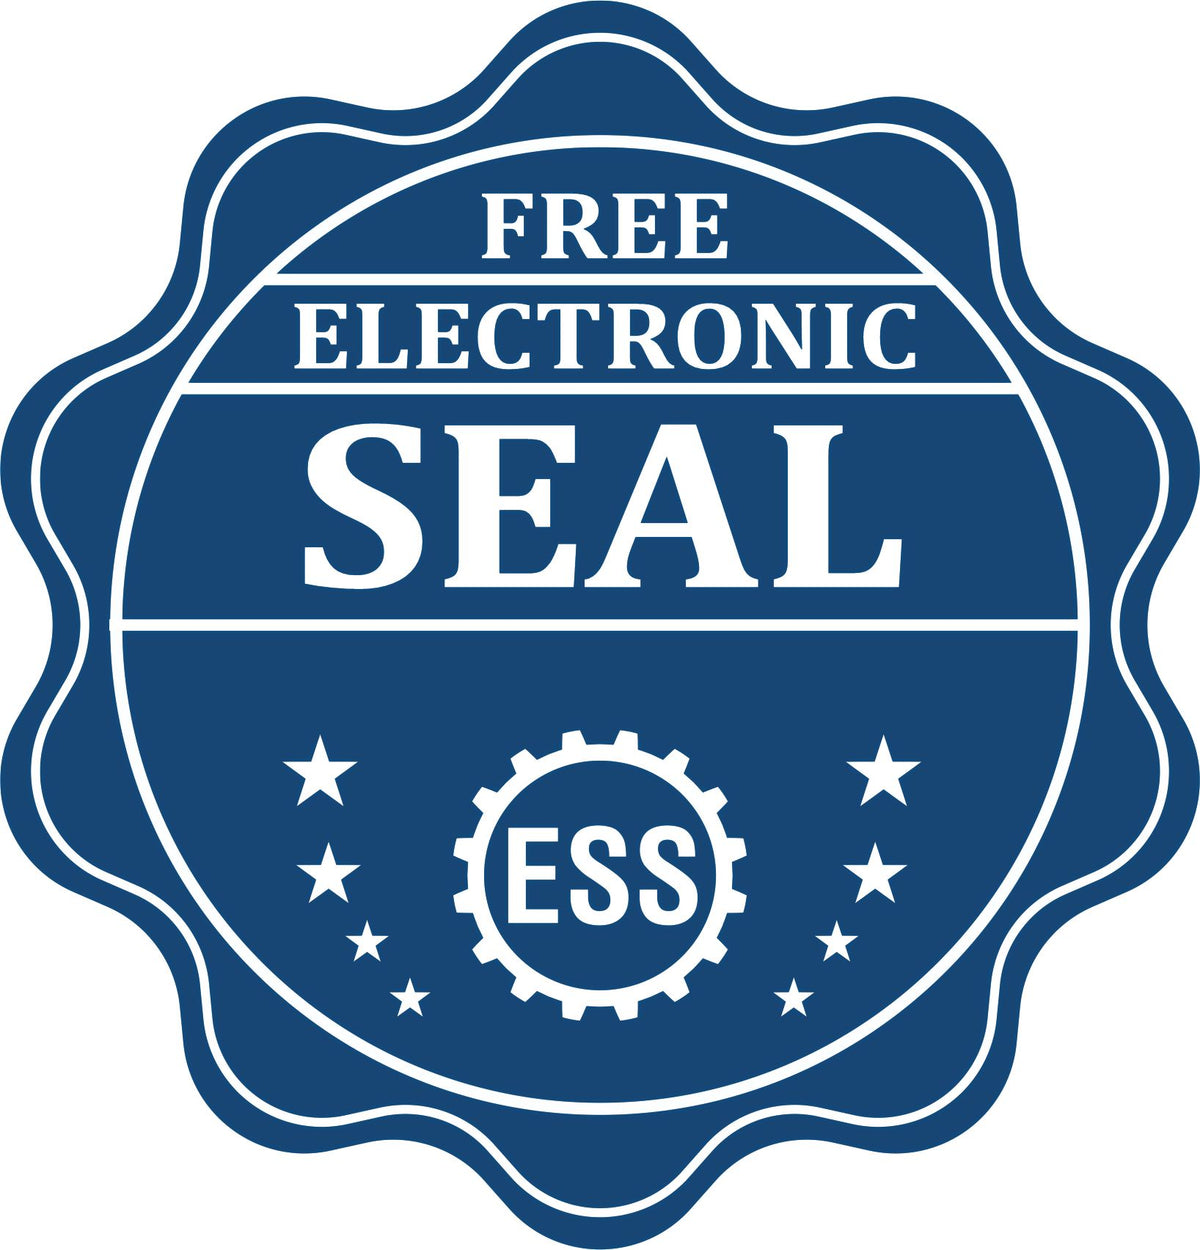 A badge showing a free electronic seal for the Gift Washington Architect Seal with stars and the ESS gear on the emblem.